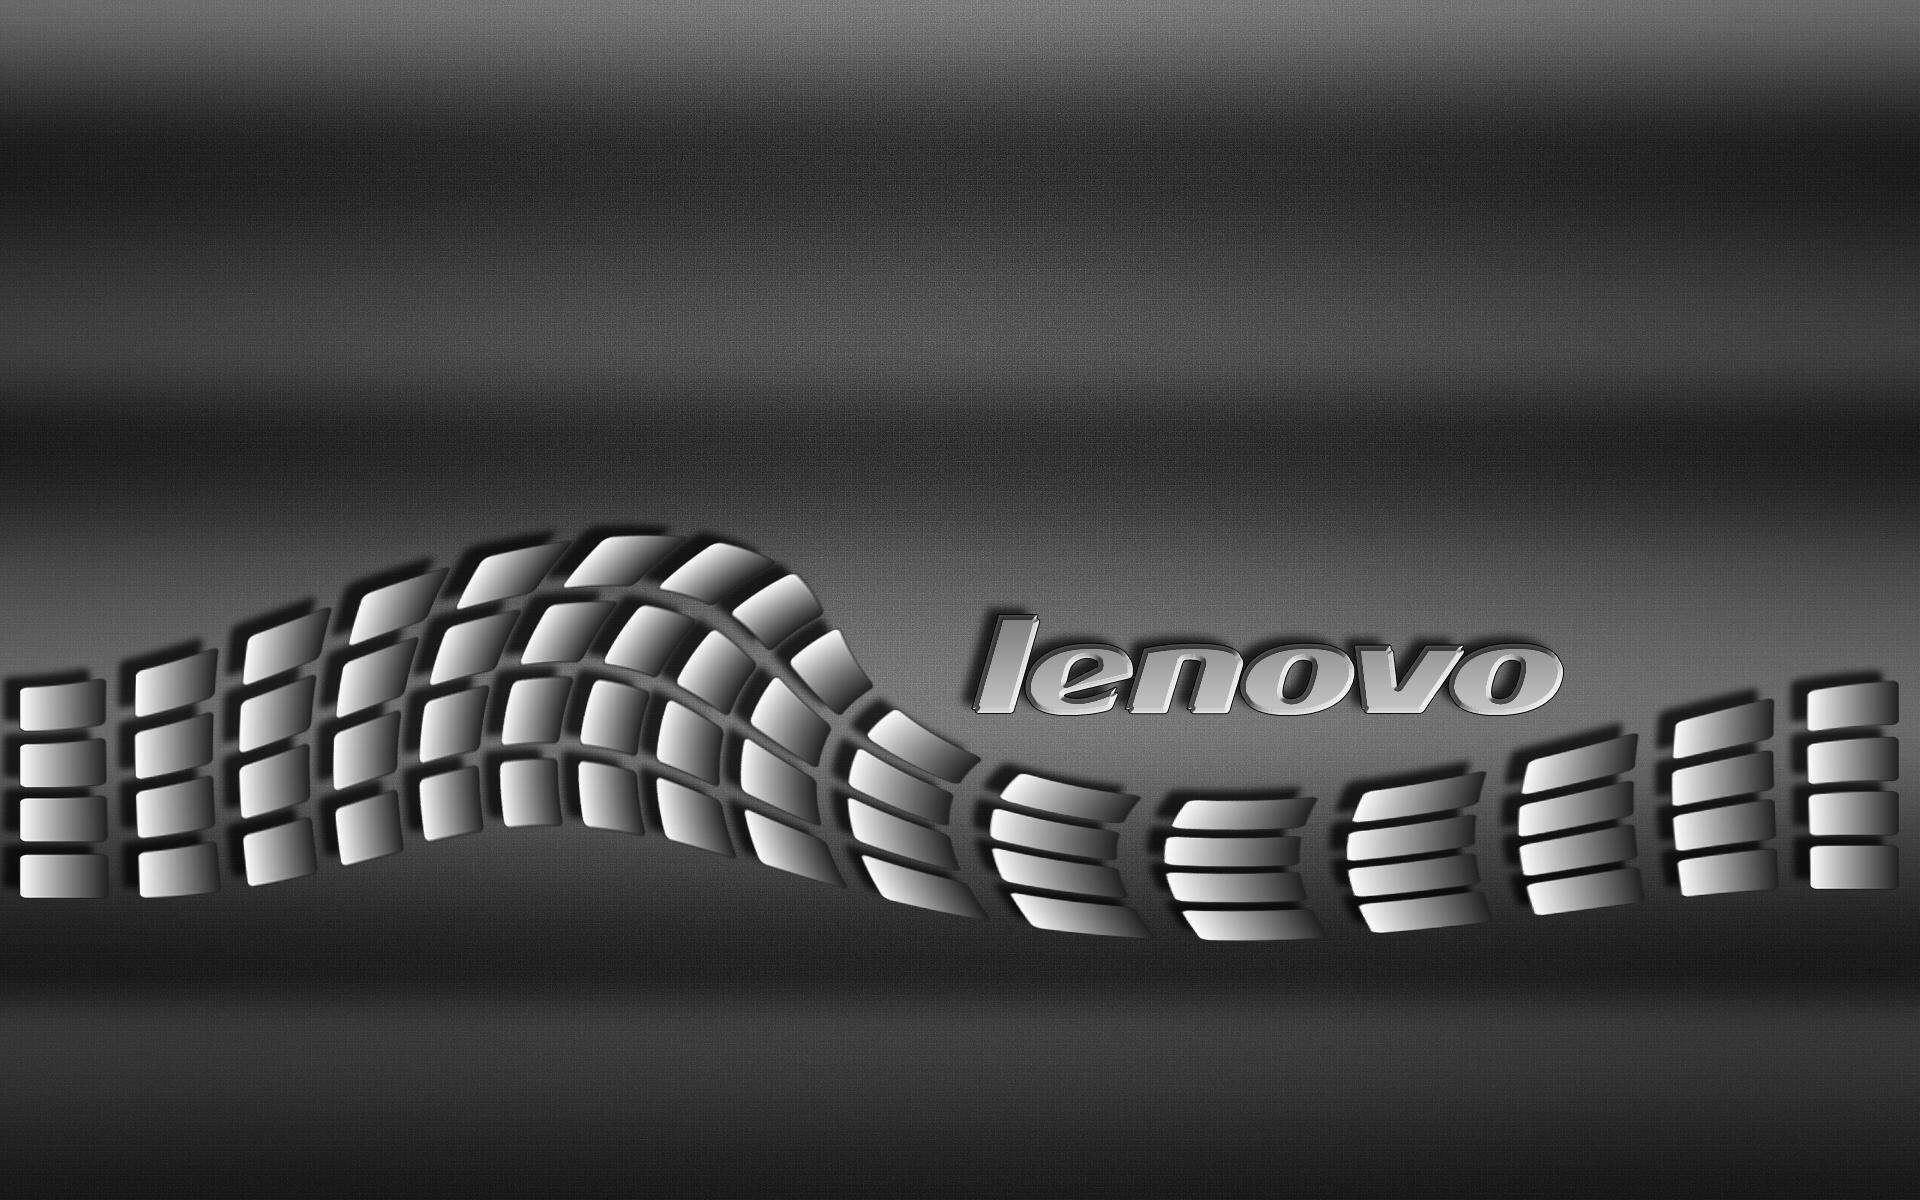 1920x1200 Full HD Lenovo Wallpapers, High Quality, AHDzBooK Backgrounds